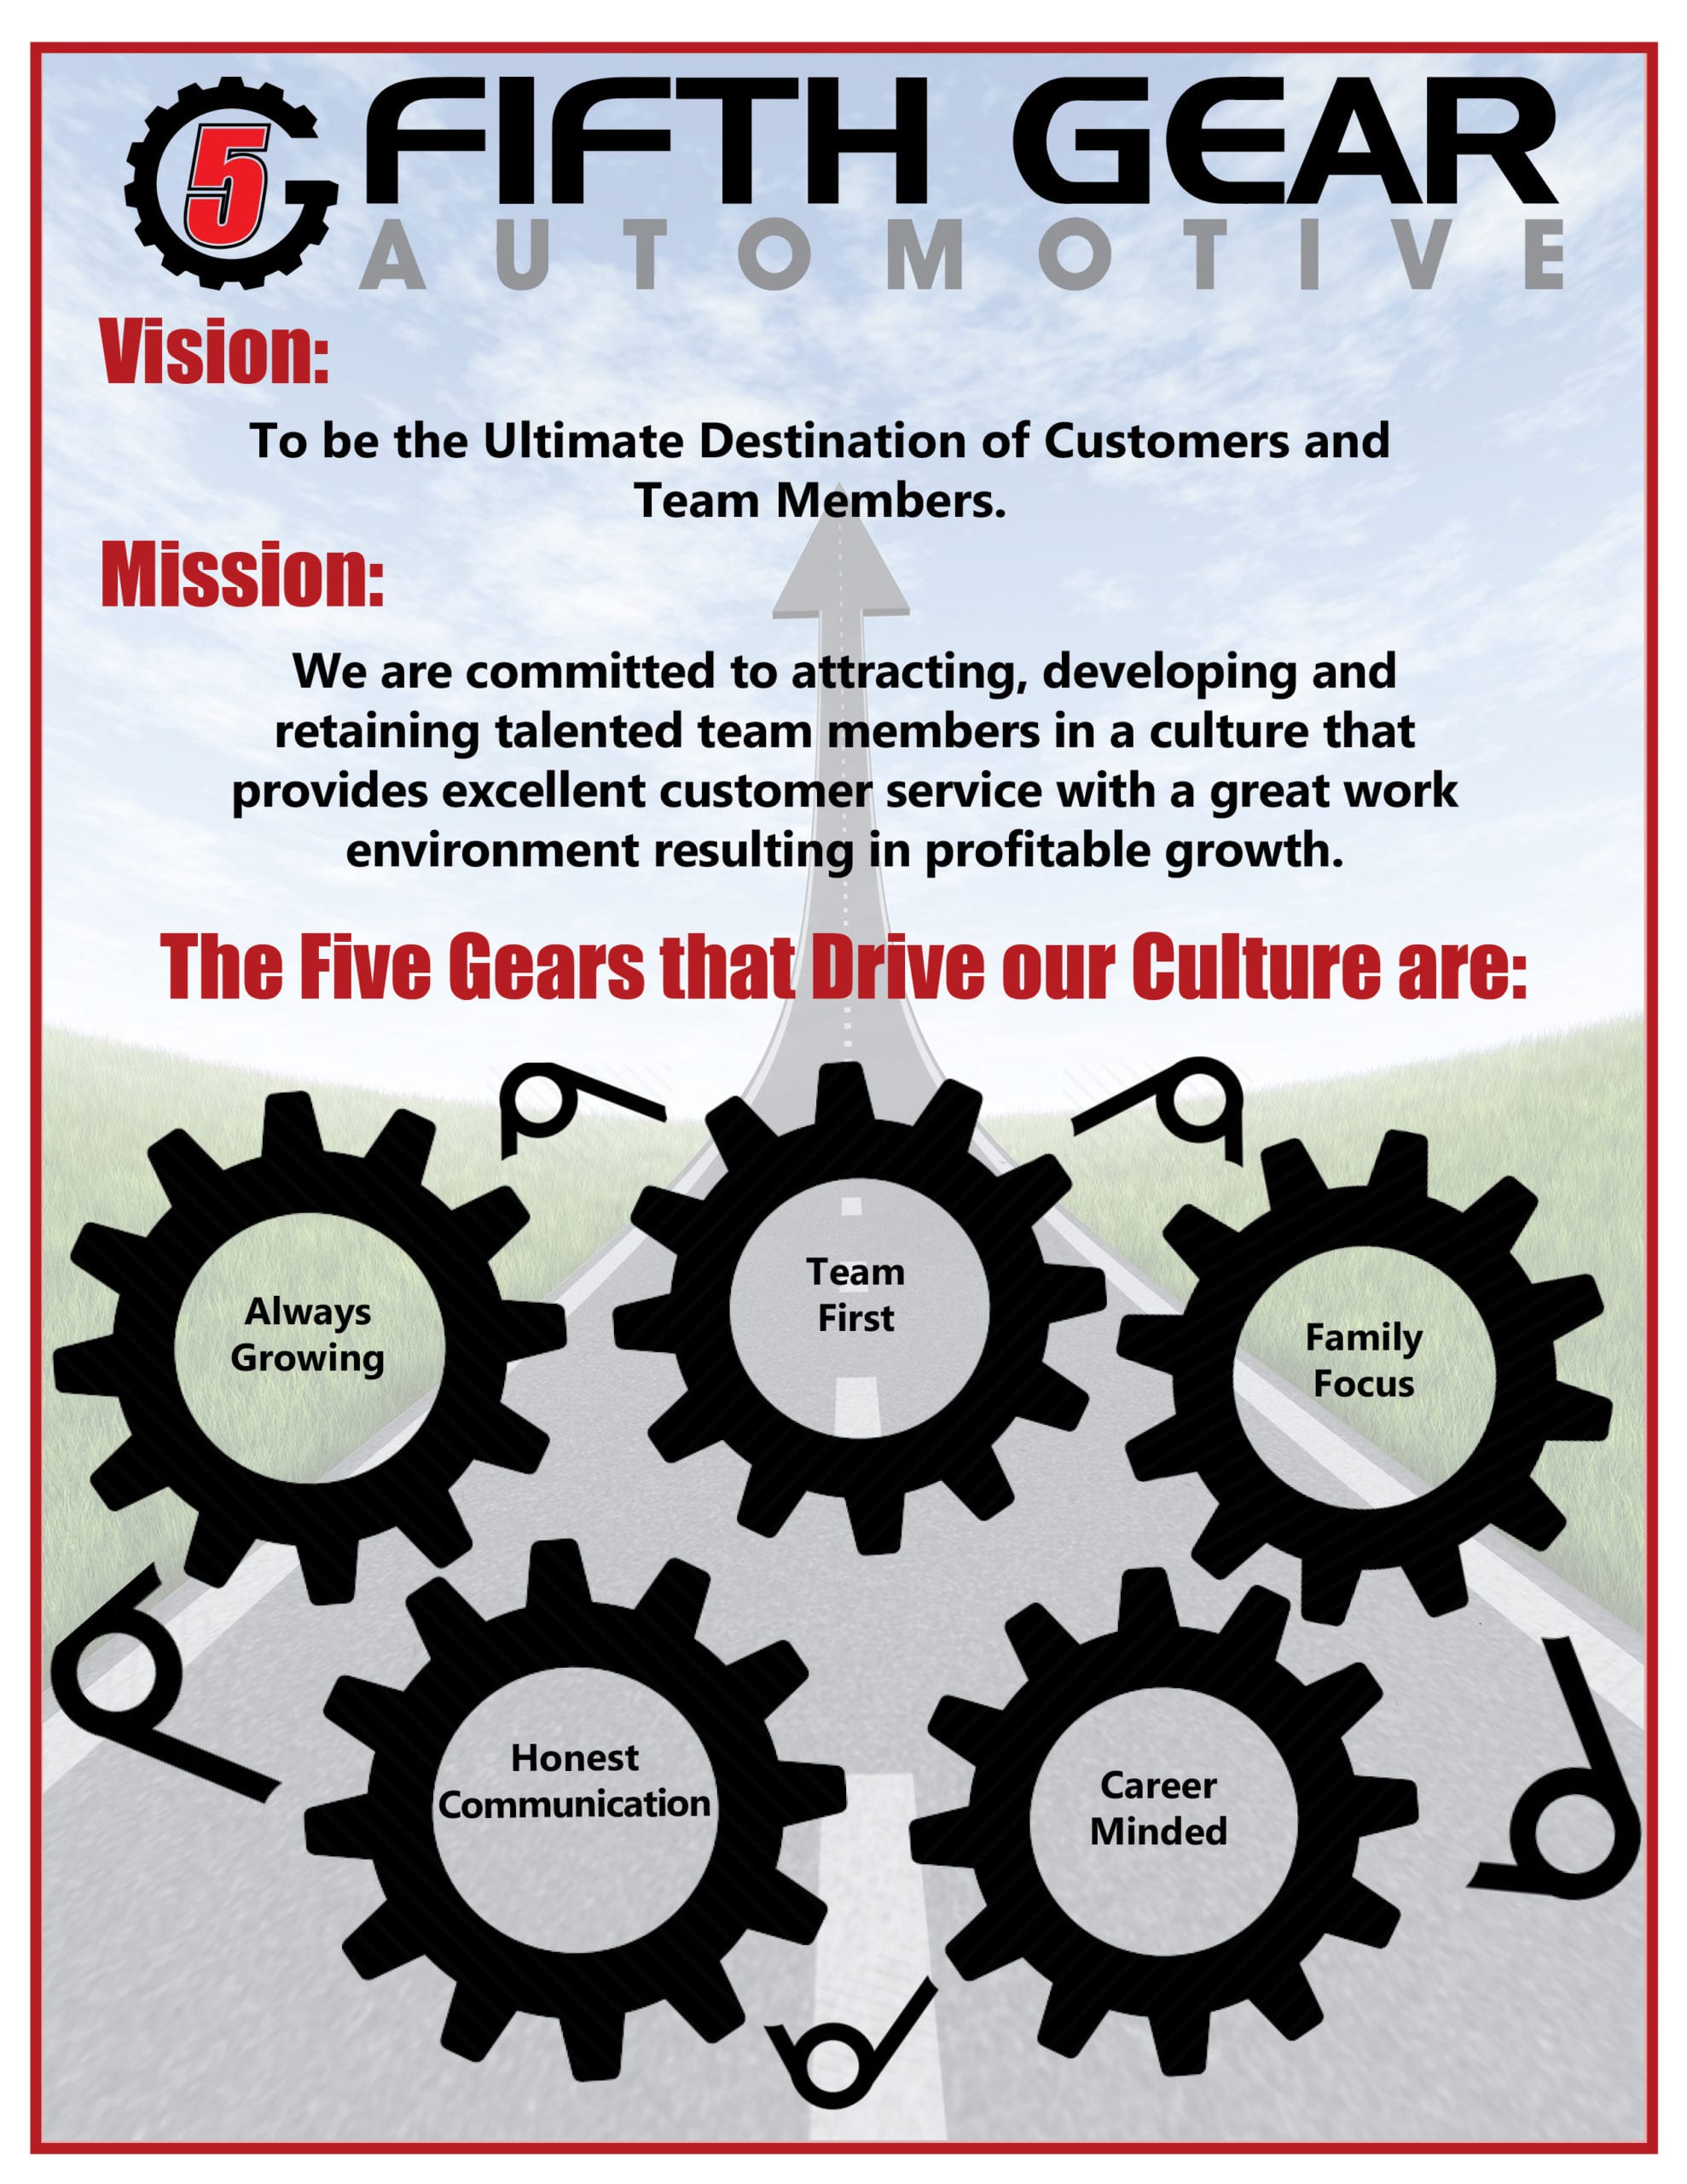 Fifth Gear Mission and Vision Statement | Lewisville and Argyle